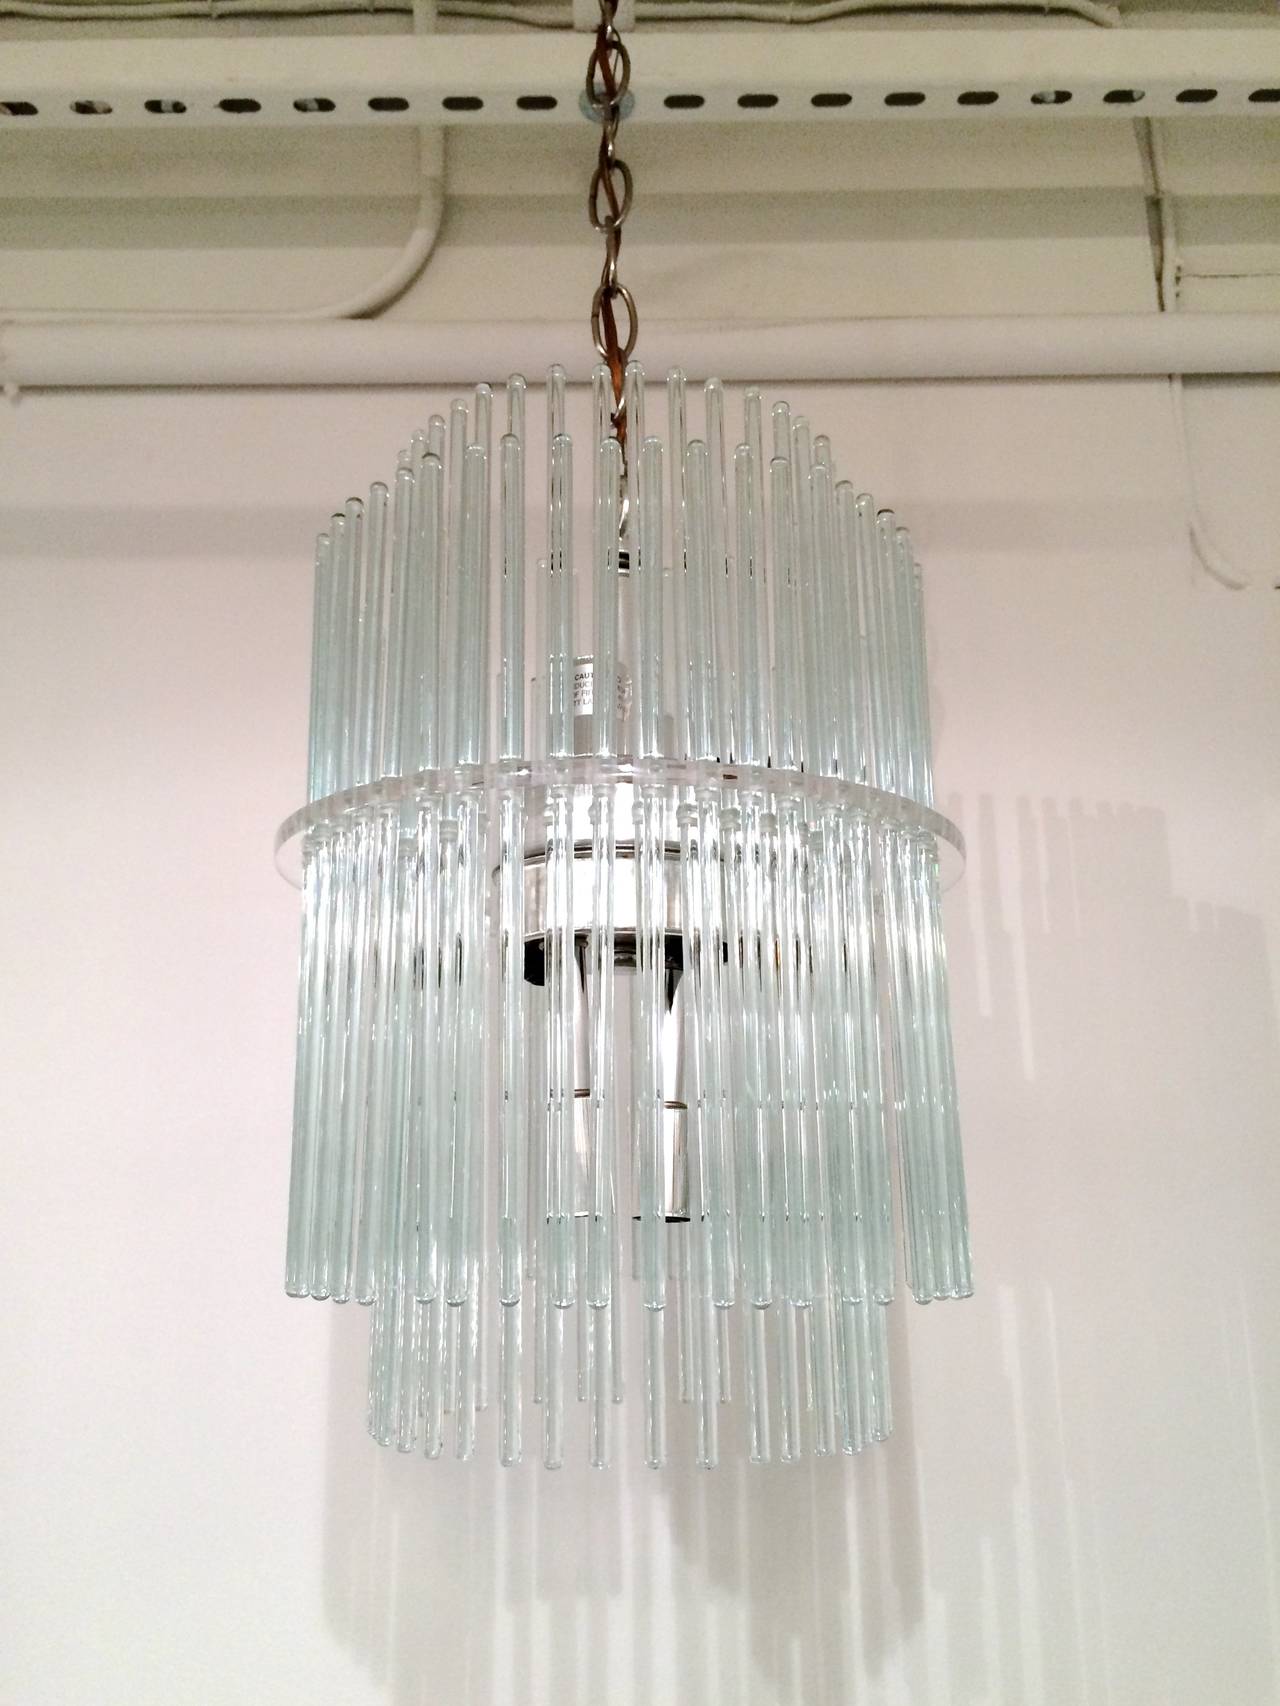 Gorgeous two-tier Lucite chandelier by Gaetano Sciolari for Lightolier with chrome sockets and hanging glass rods. The chandelier takes eight 40W candelabra bulbs. Fully rewired.